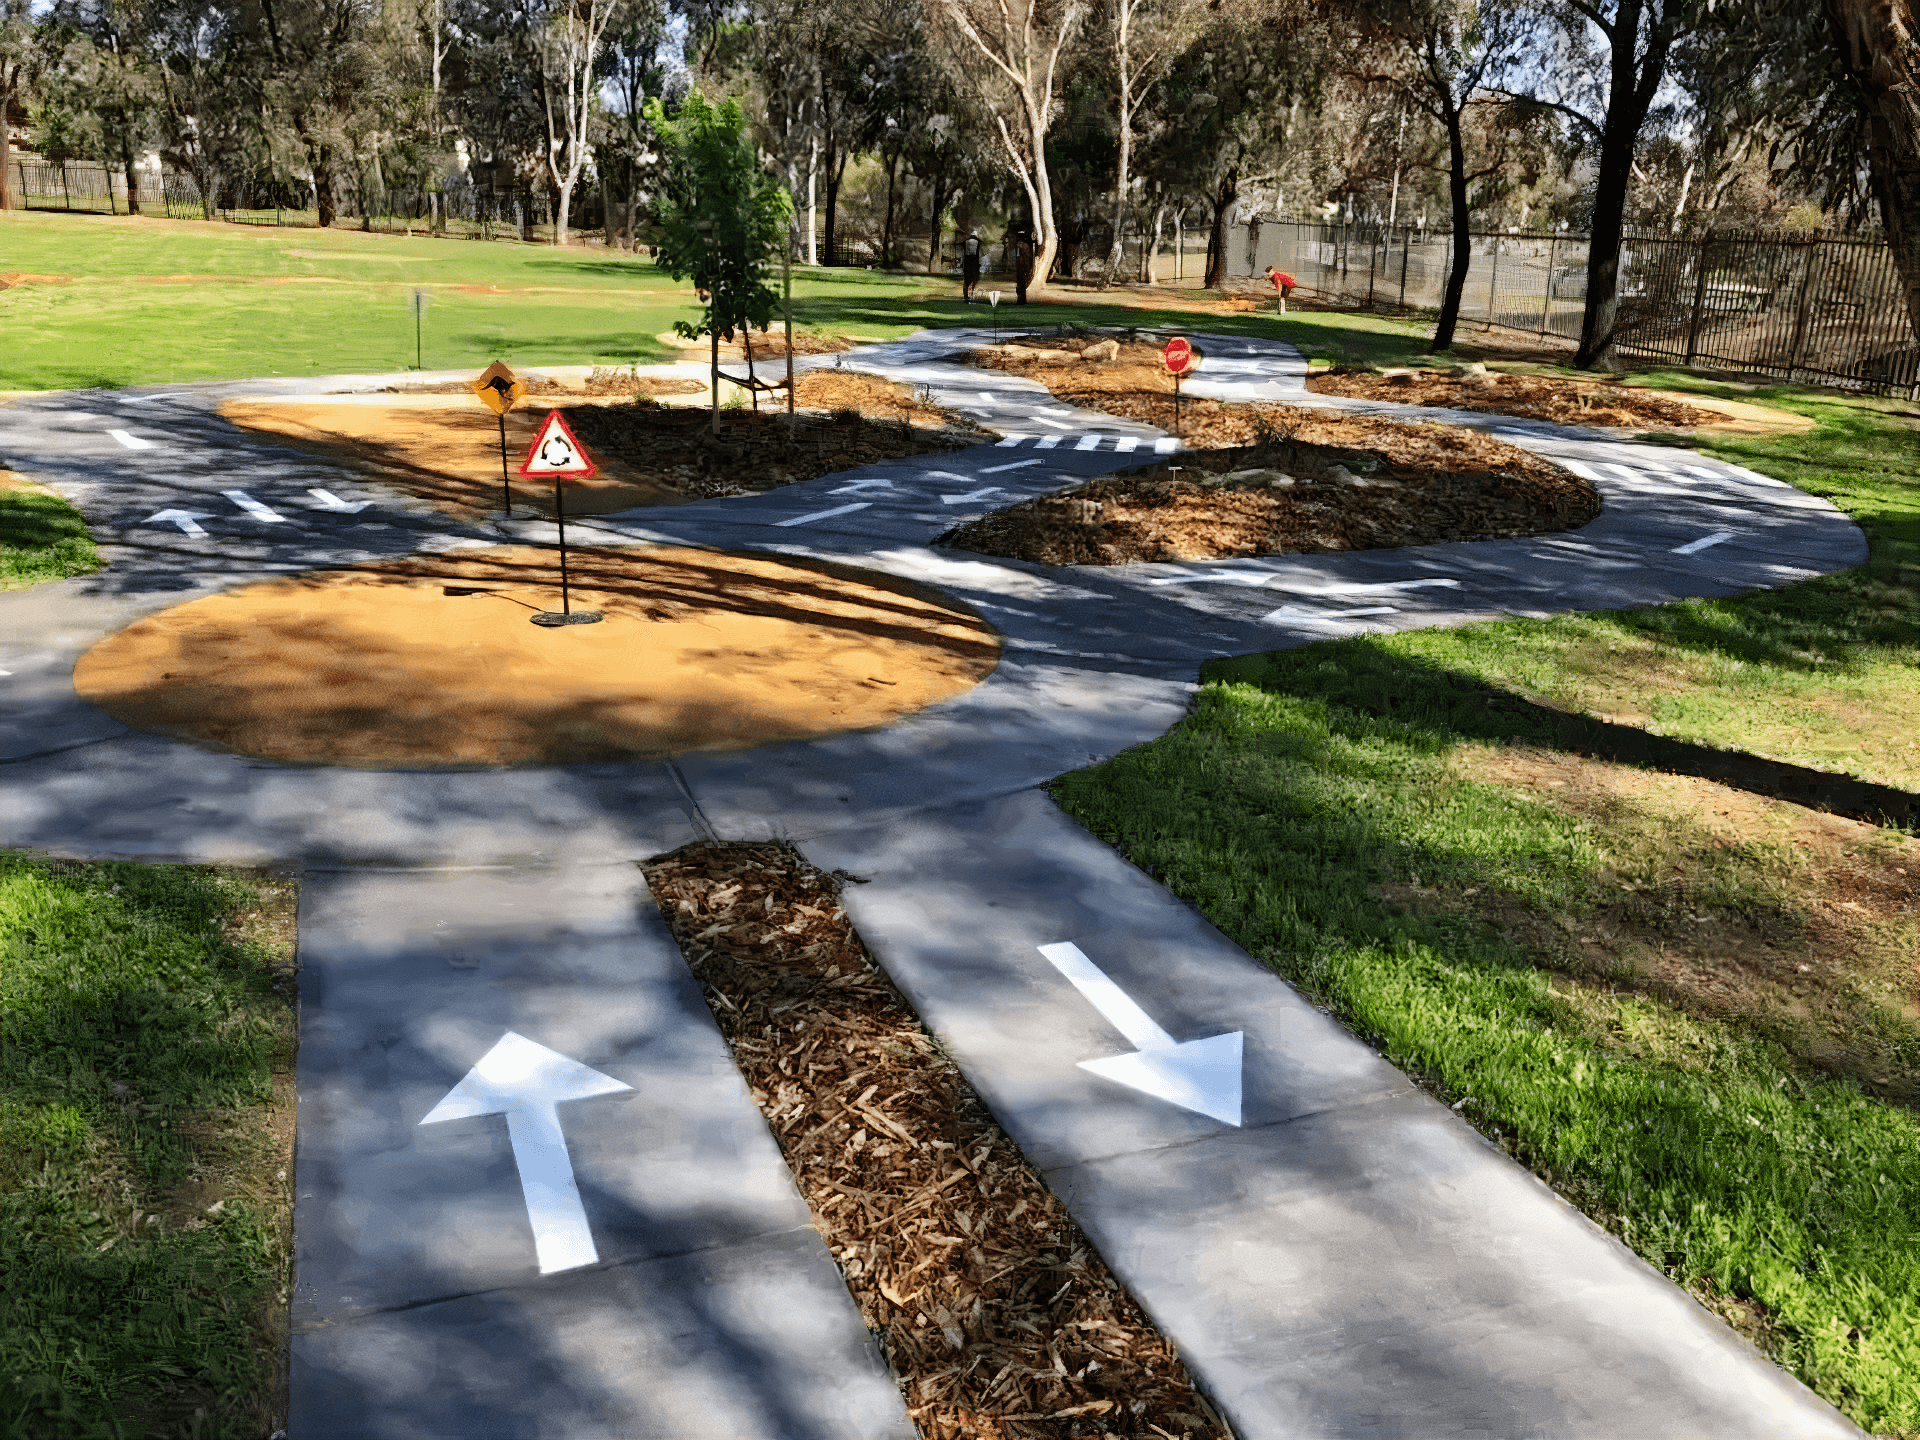 Road roundabout and playground concreting by Dan and Dan Landscaping